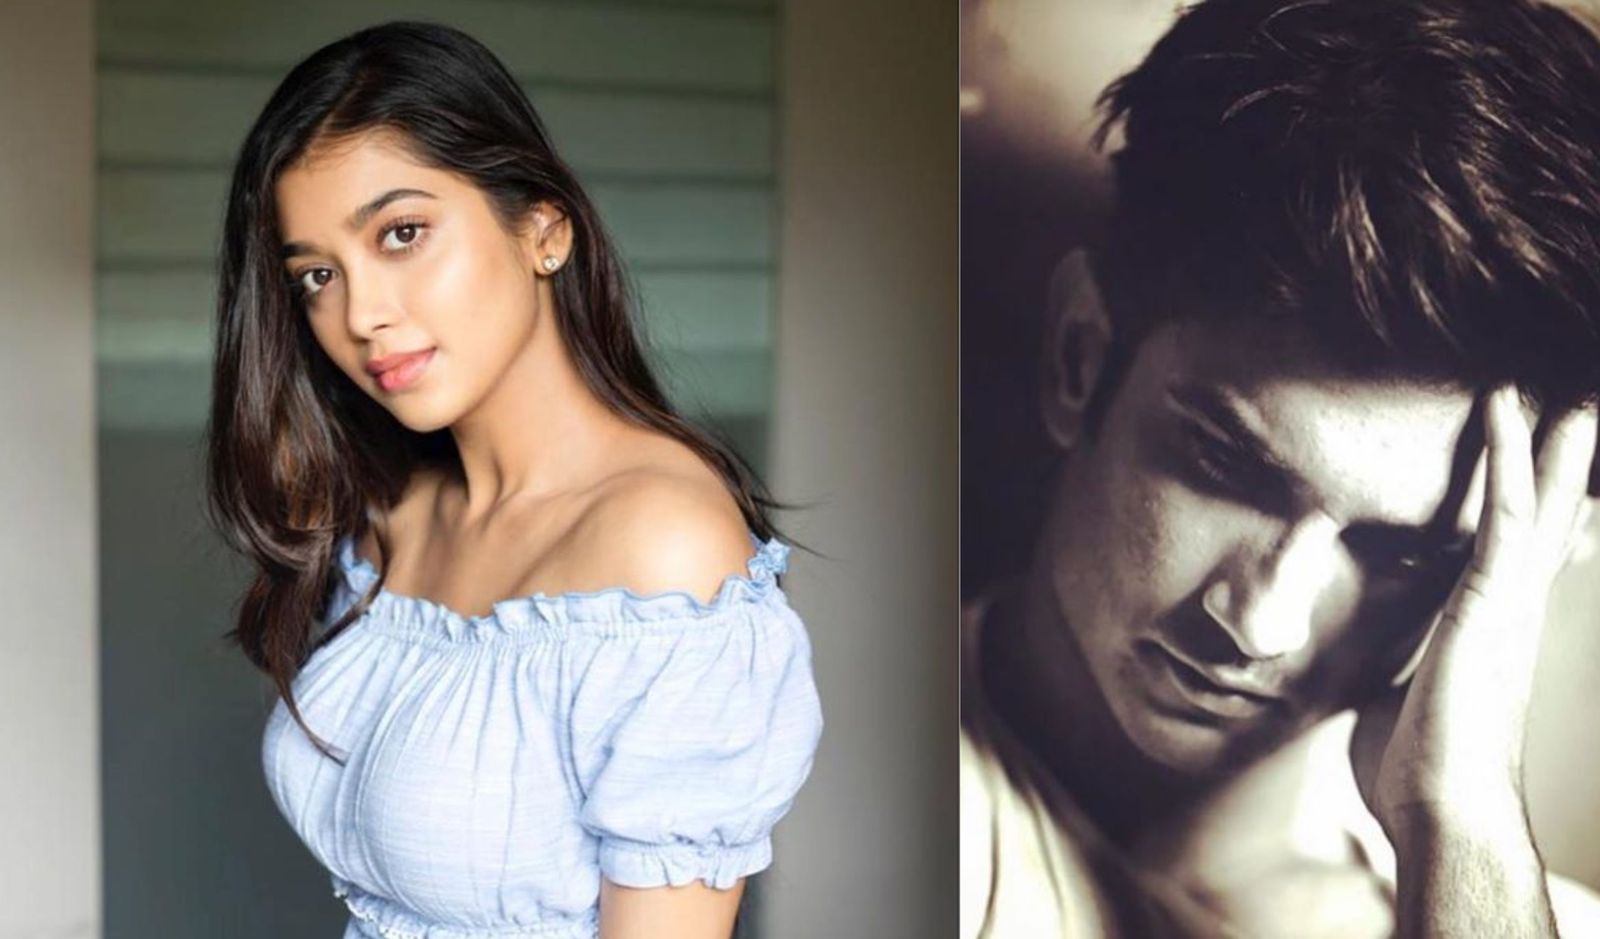 Exclusive: Digangana Suryavanshi Says It Was Sushant’s Life And Decision, Cannot Form An Opinion About It